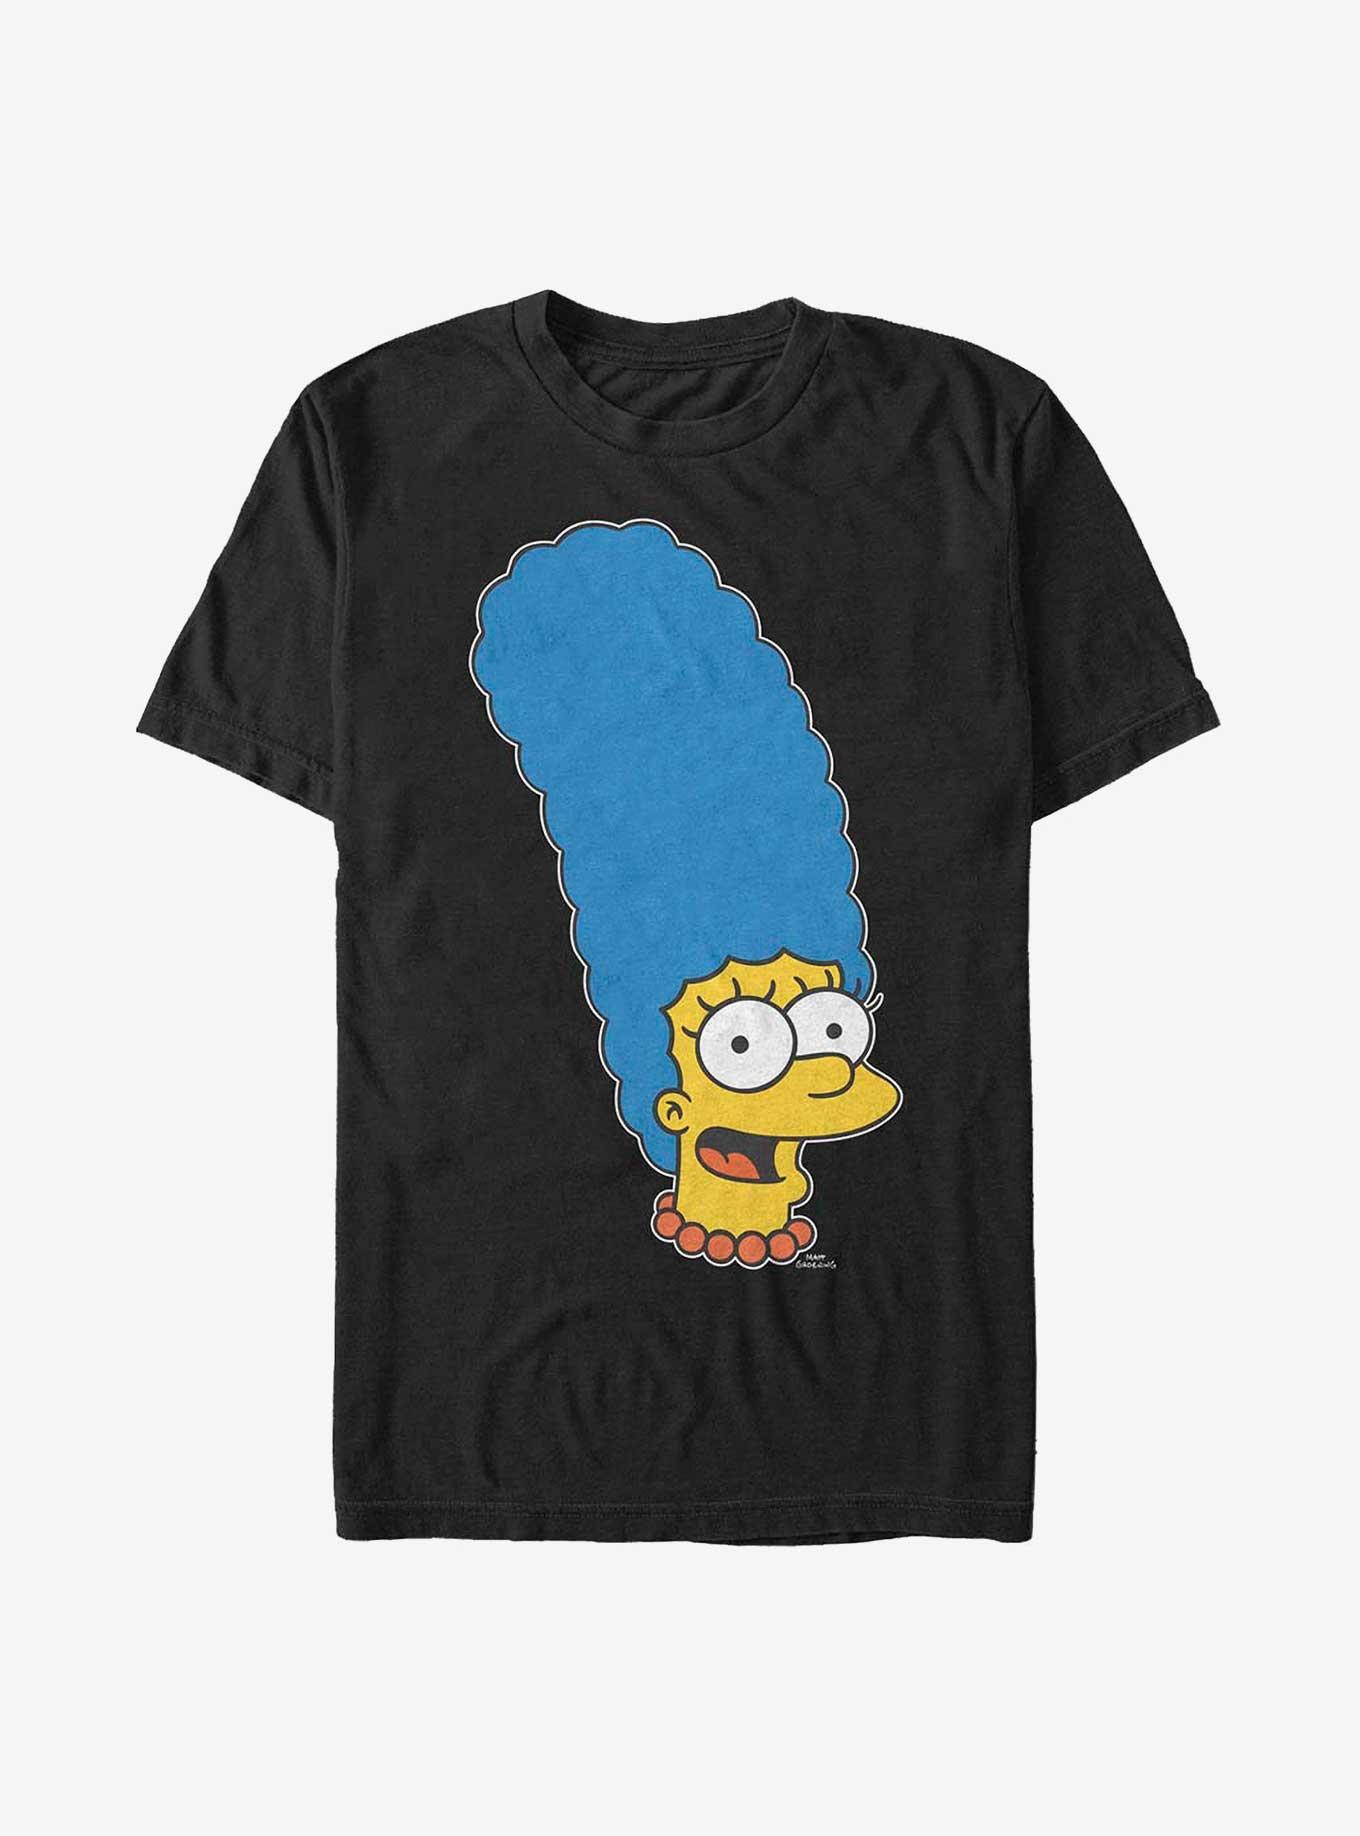 The Simpsons Marge Face Image T-Shirt, BLACK, hi-res